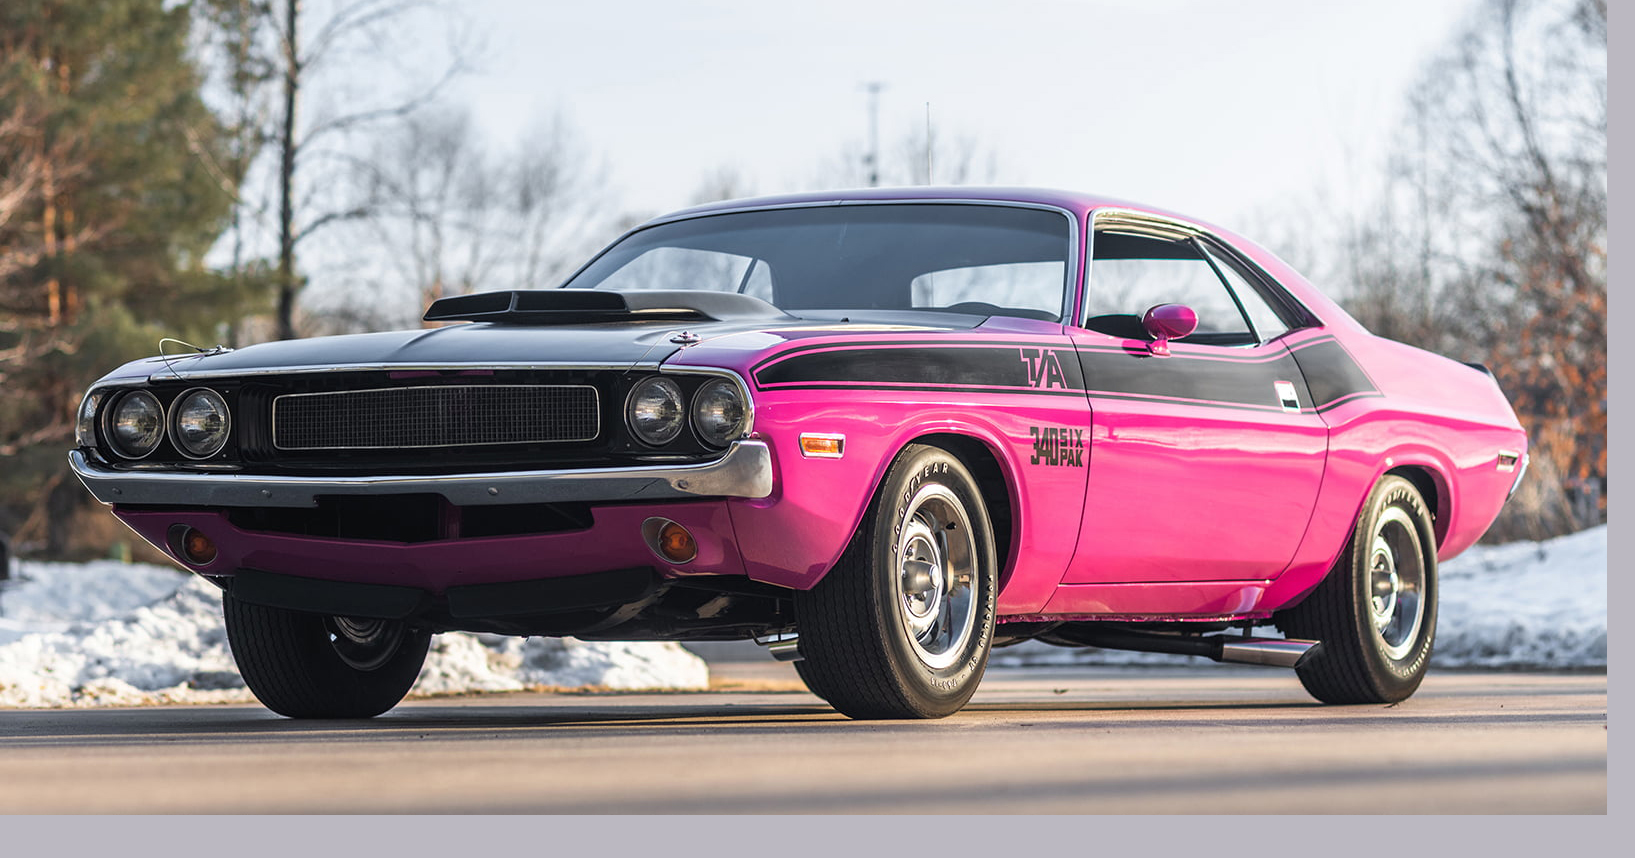 2. 1971 Pink Panther Dodge Challenger T-A